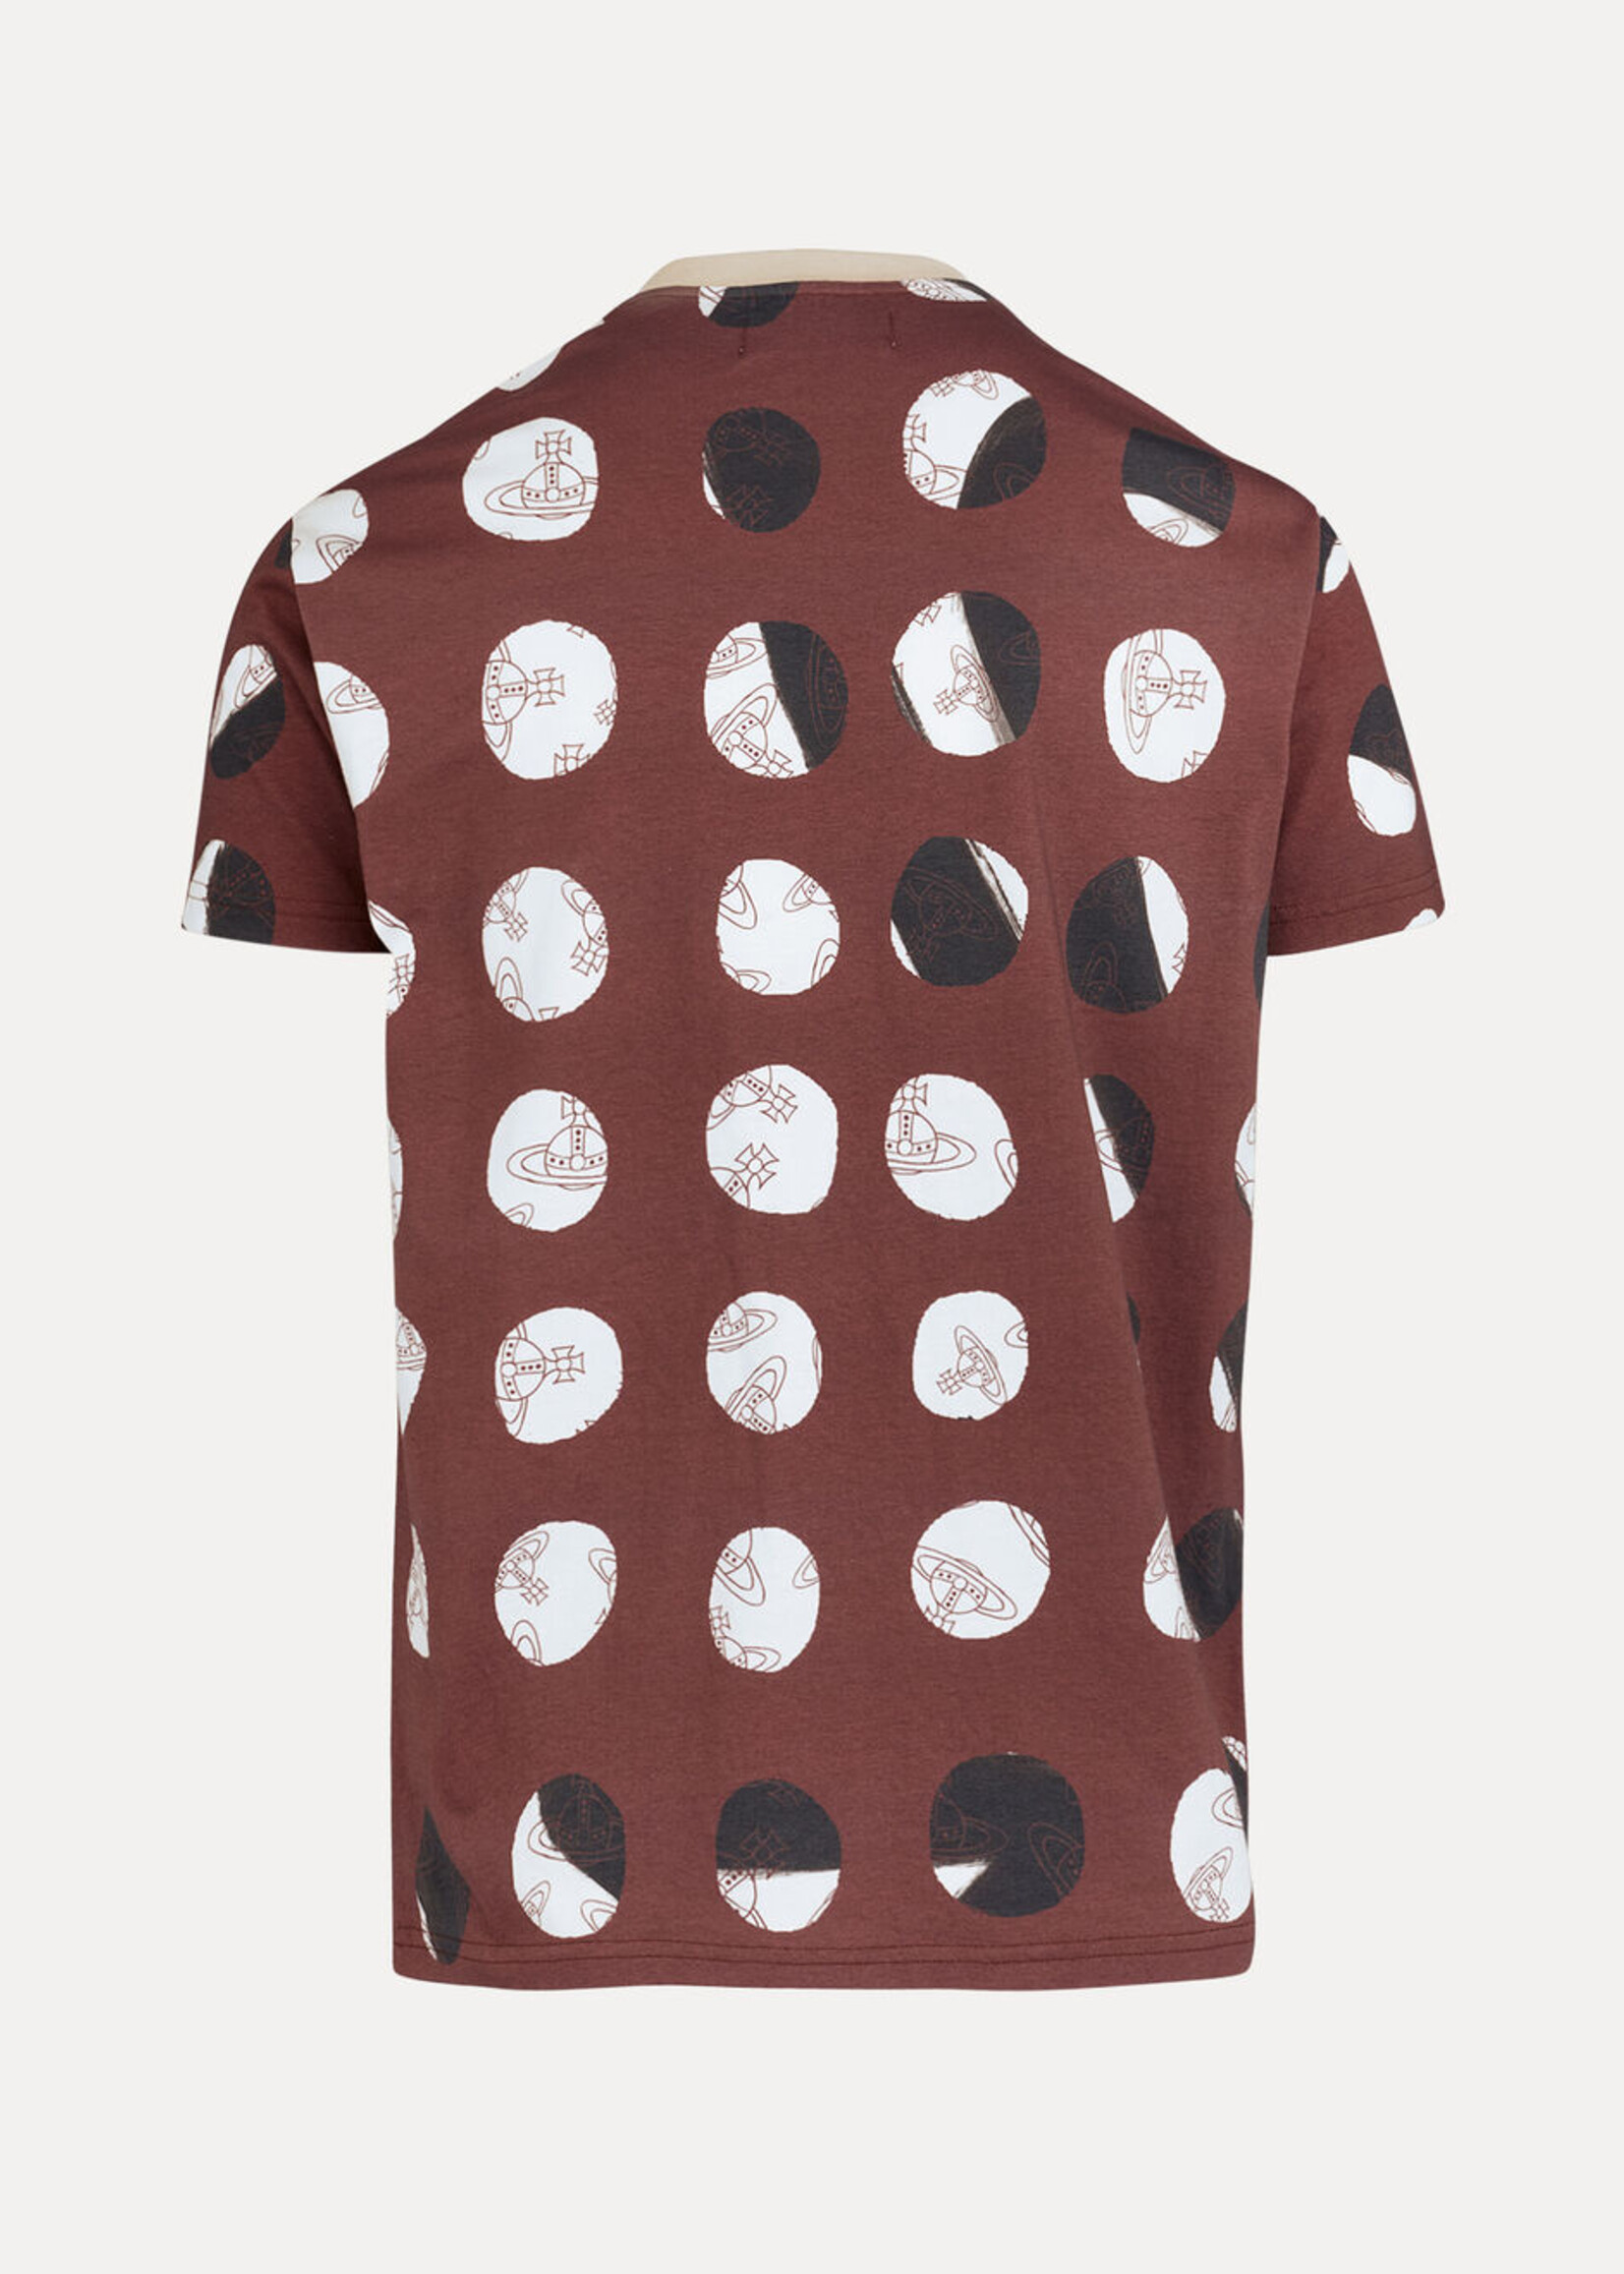 VIVIENNE WESTWOOD Classic T-shirt in Dots & Orbs All Over Print